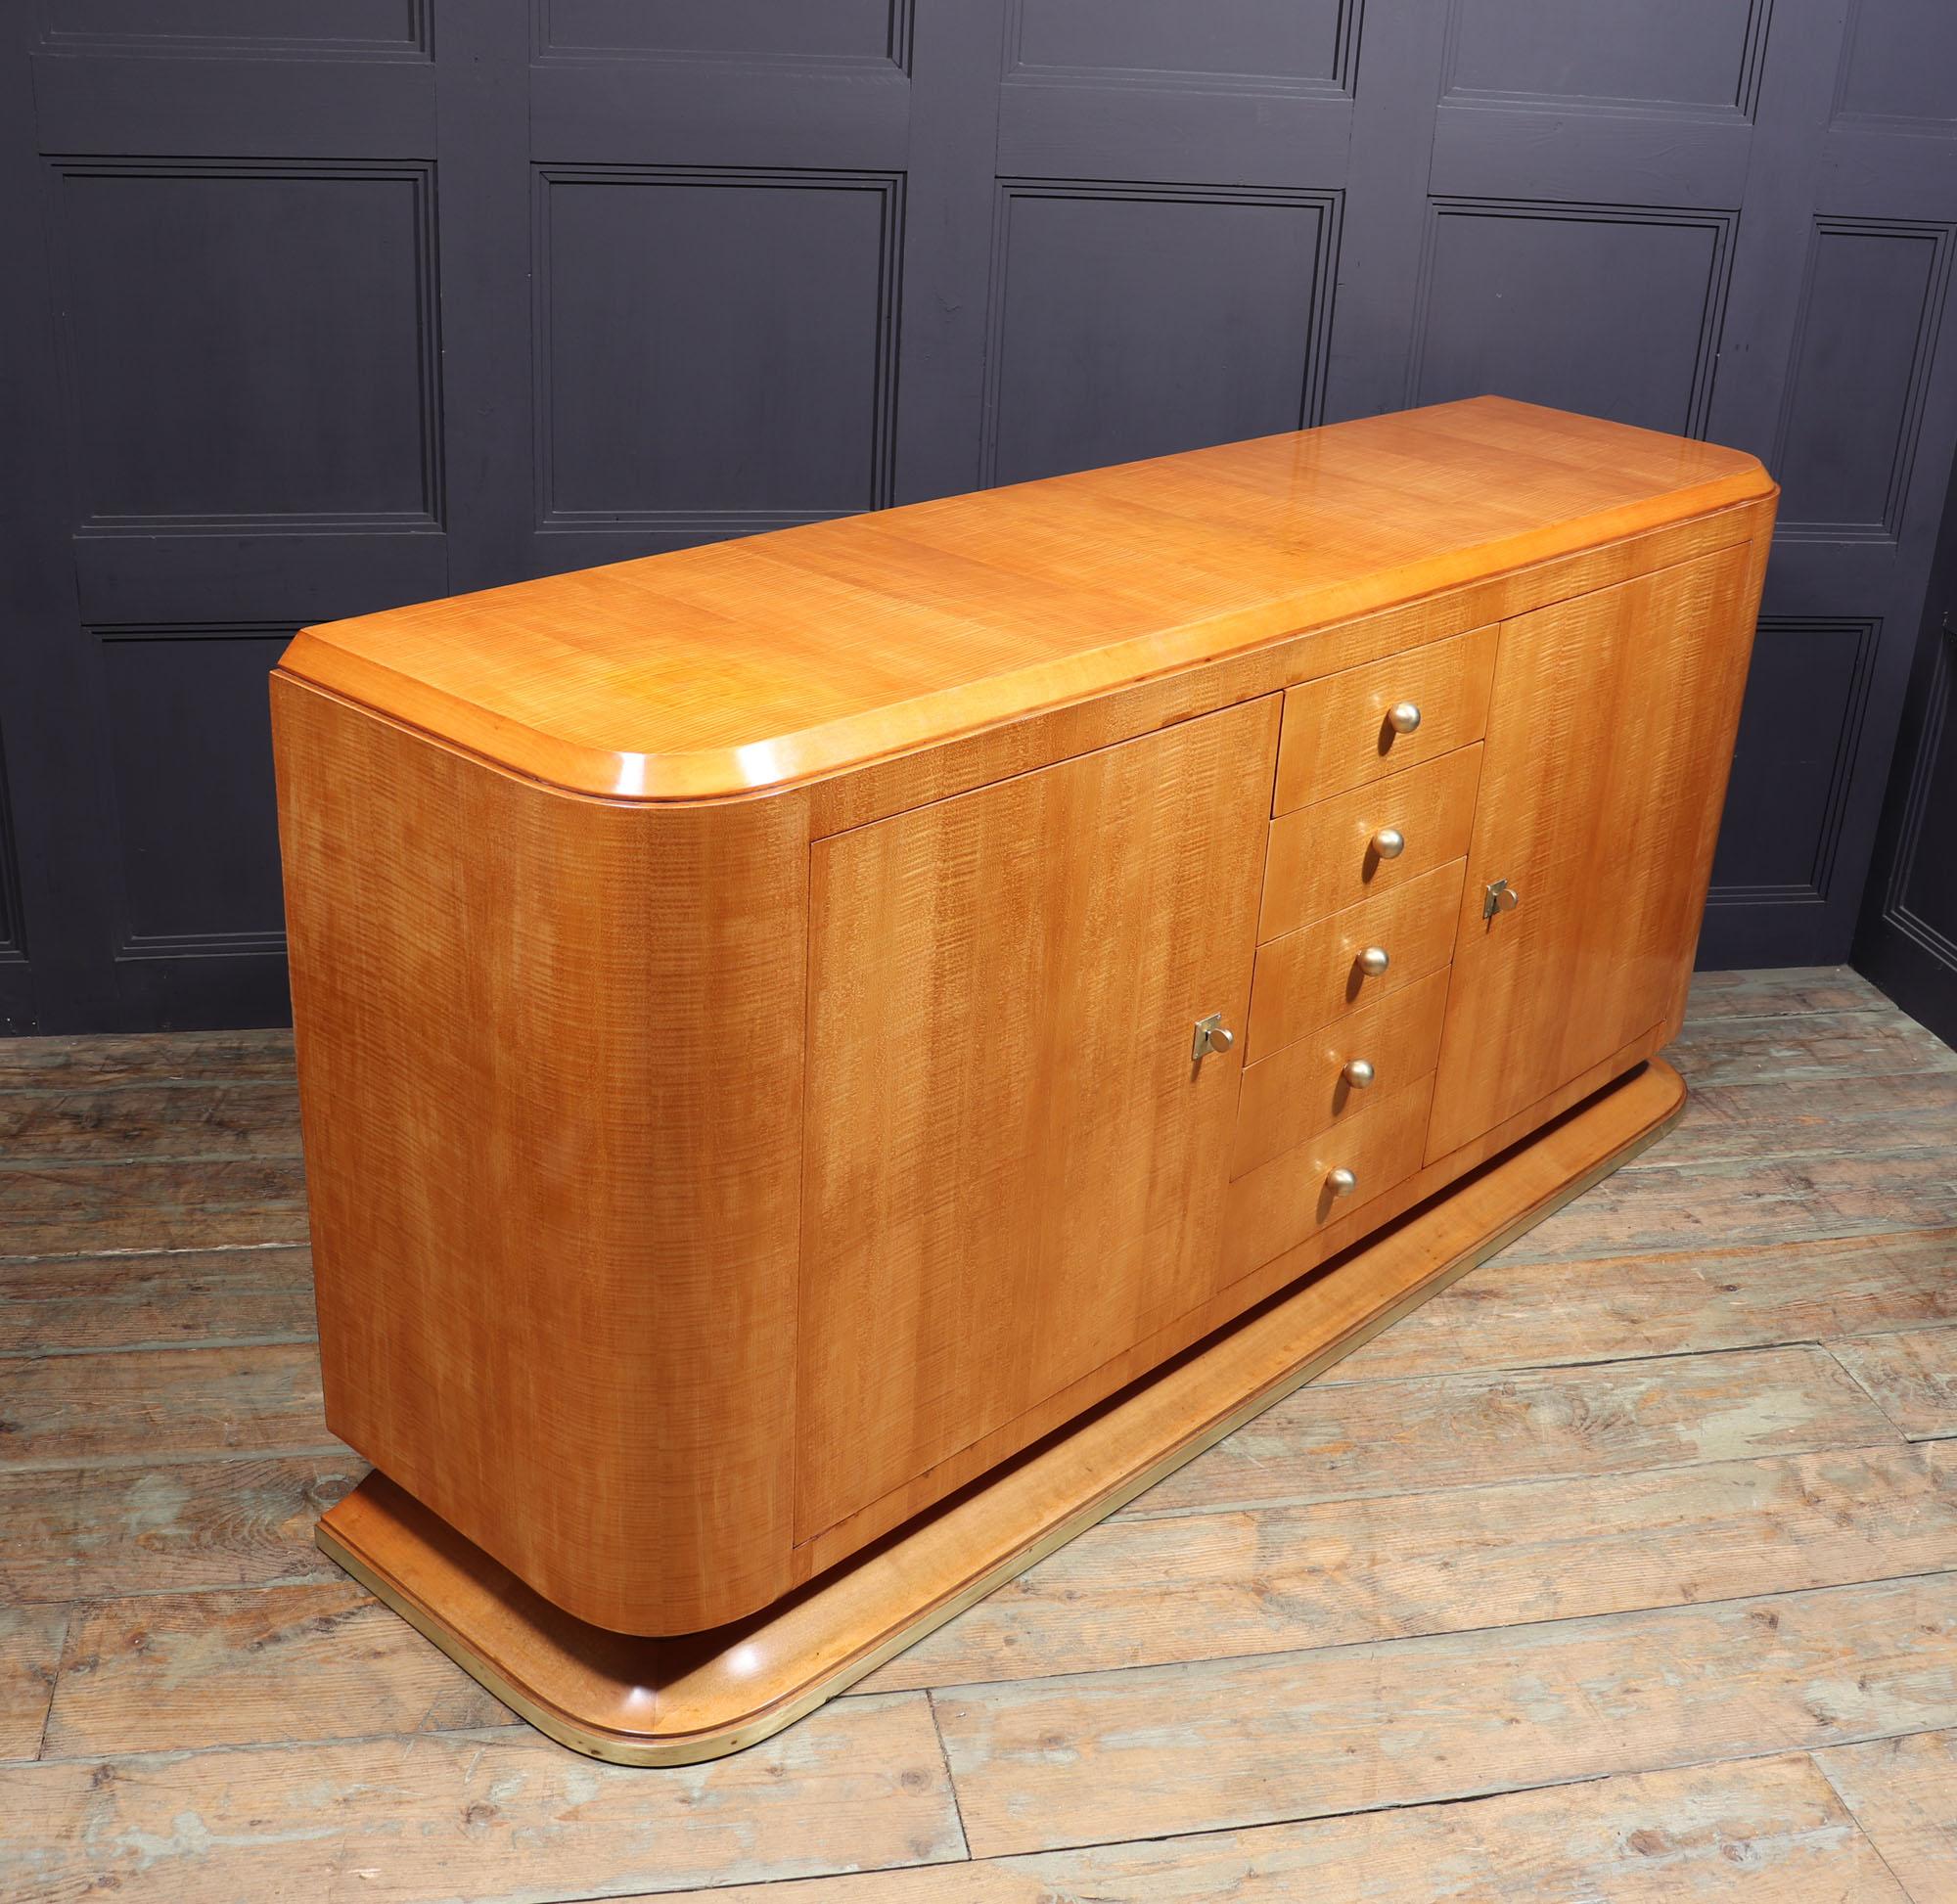 French Art Deco Sideboard in Sycamore In Excellent Condition For Sale In Paddock Wood Tonbridge, GB